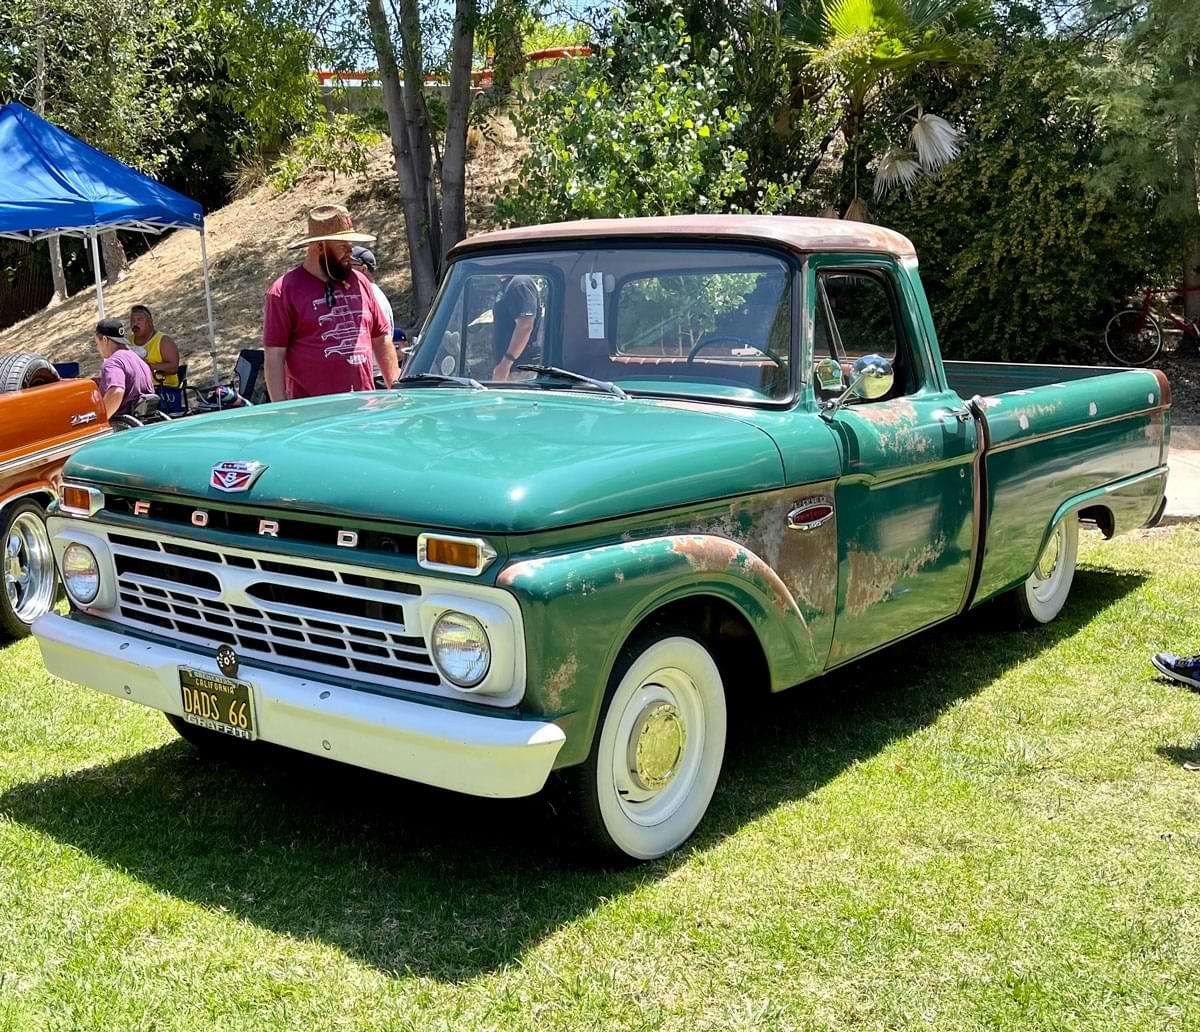 Green F-100 side view